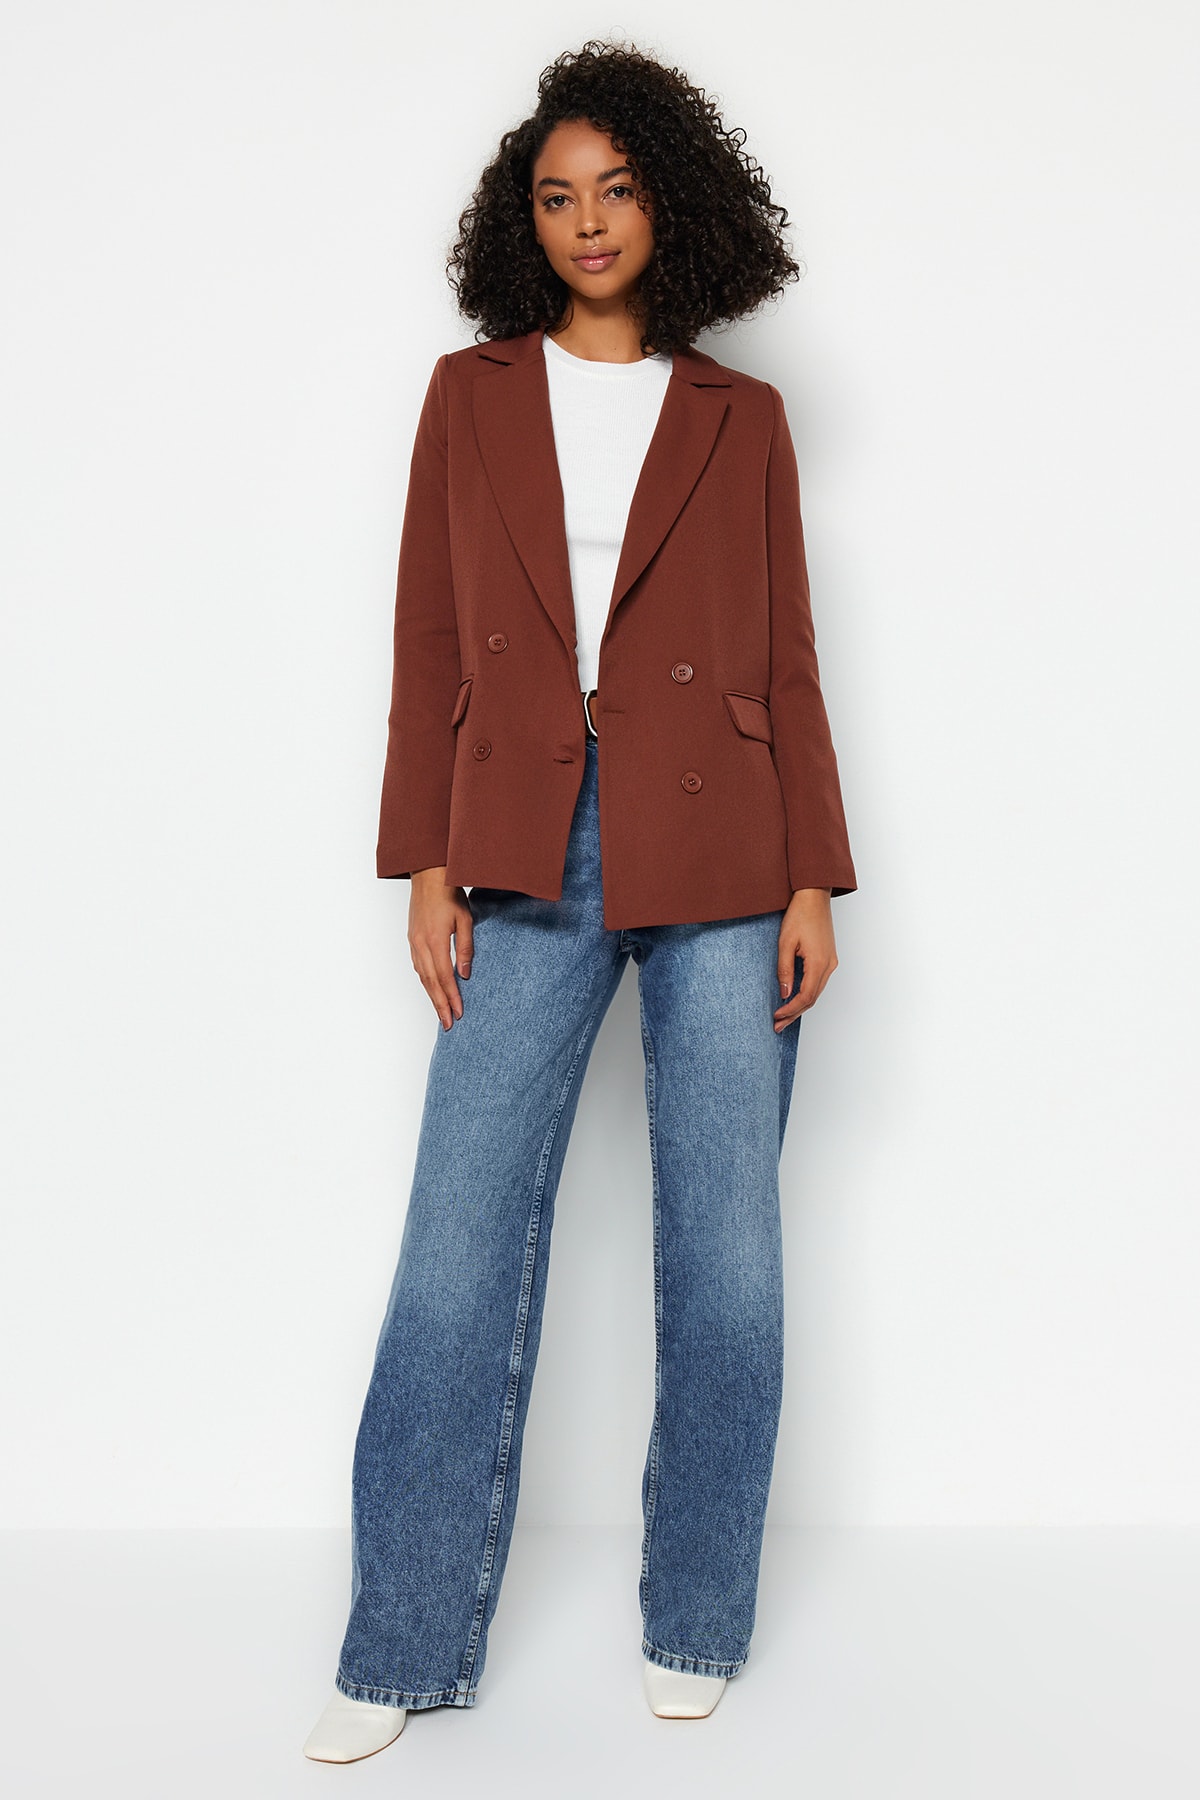 Trendyol Brown Regular Lined Double Breasted Closure Woven Blazer Jacket